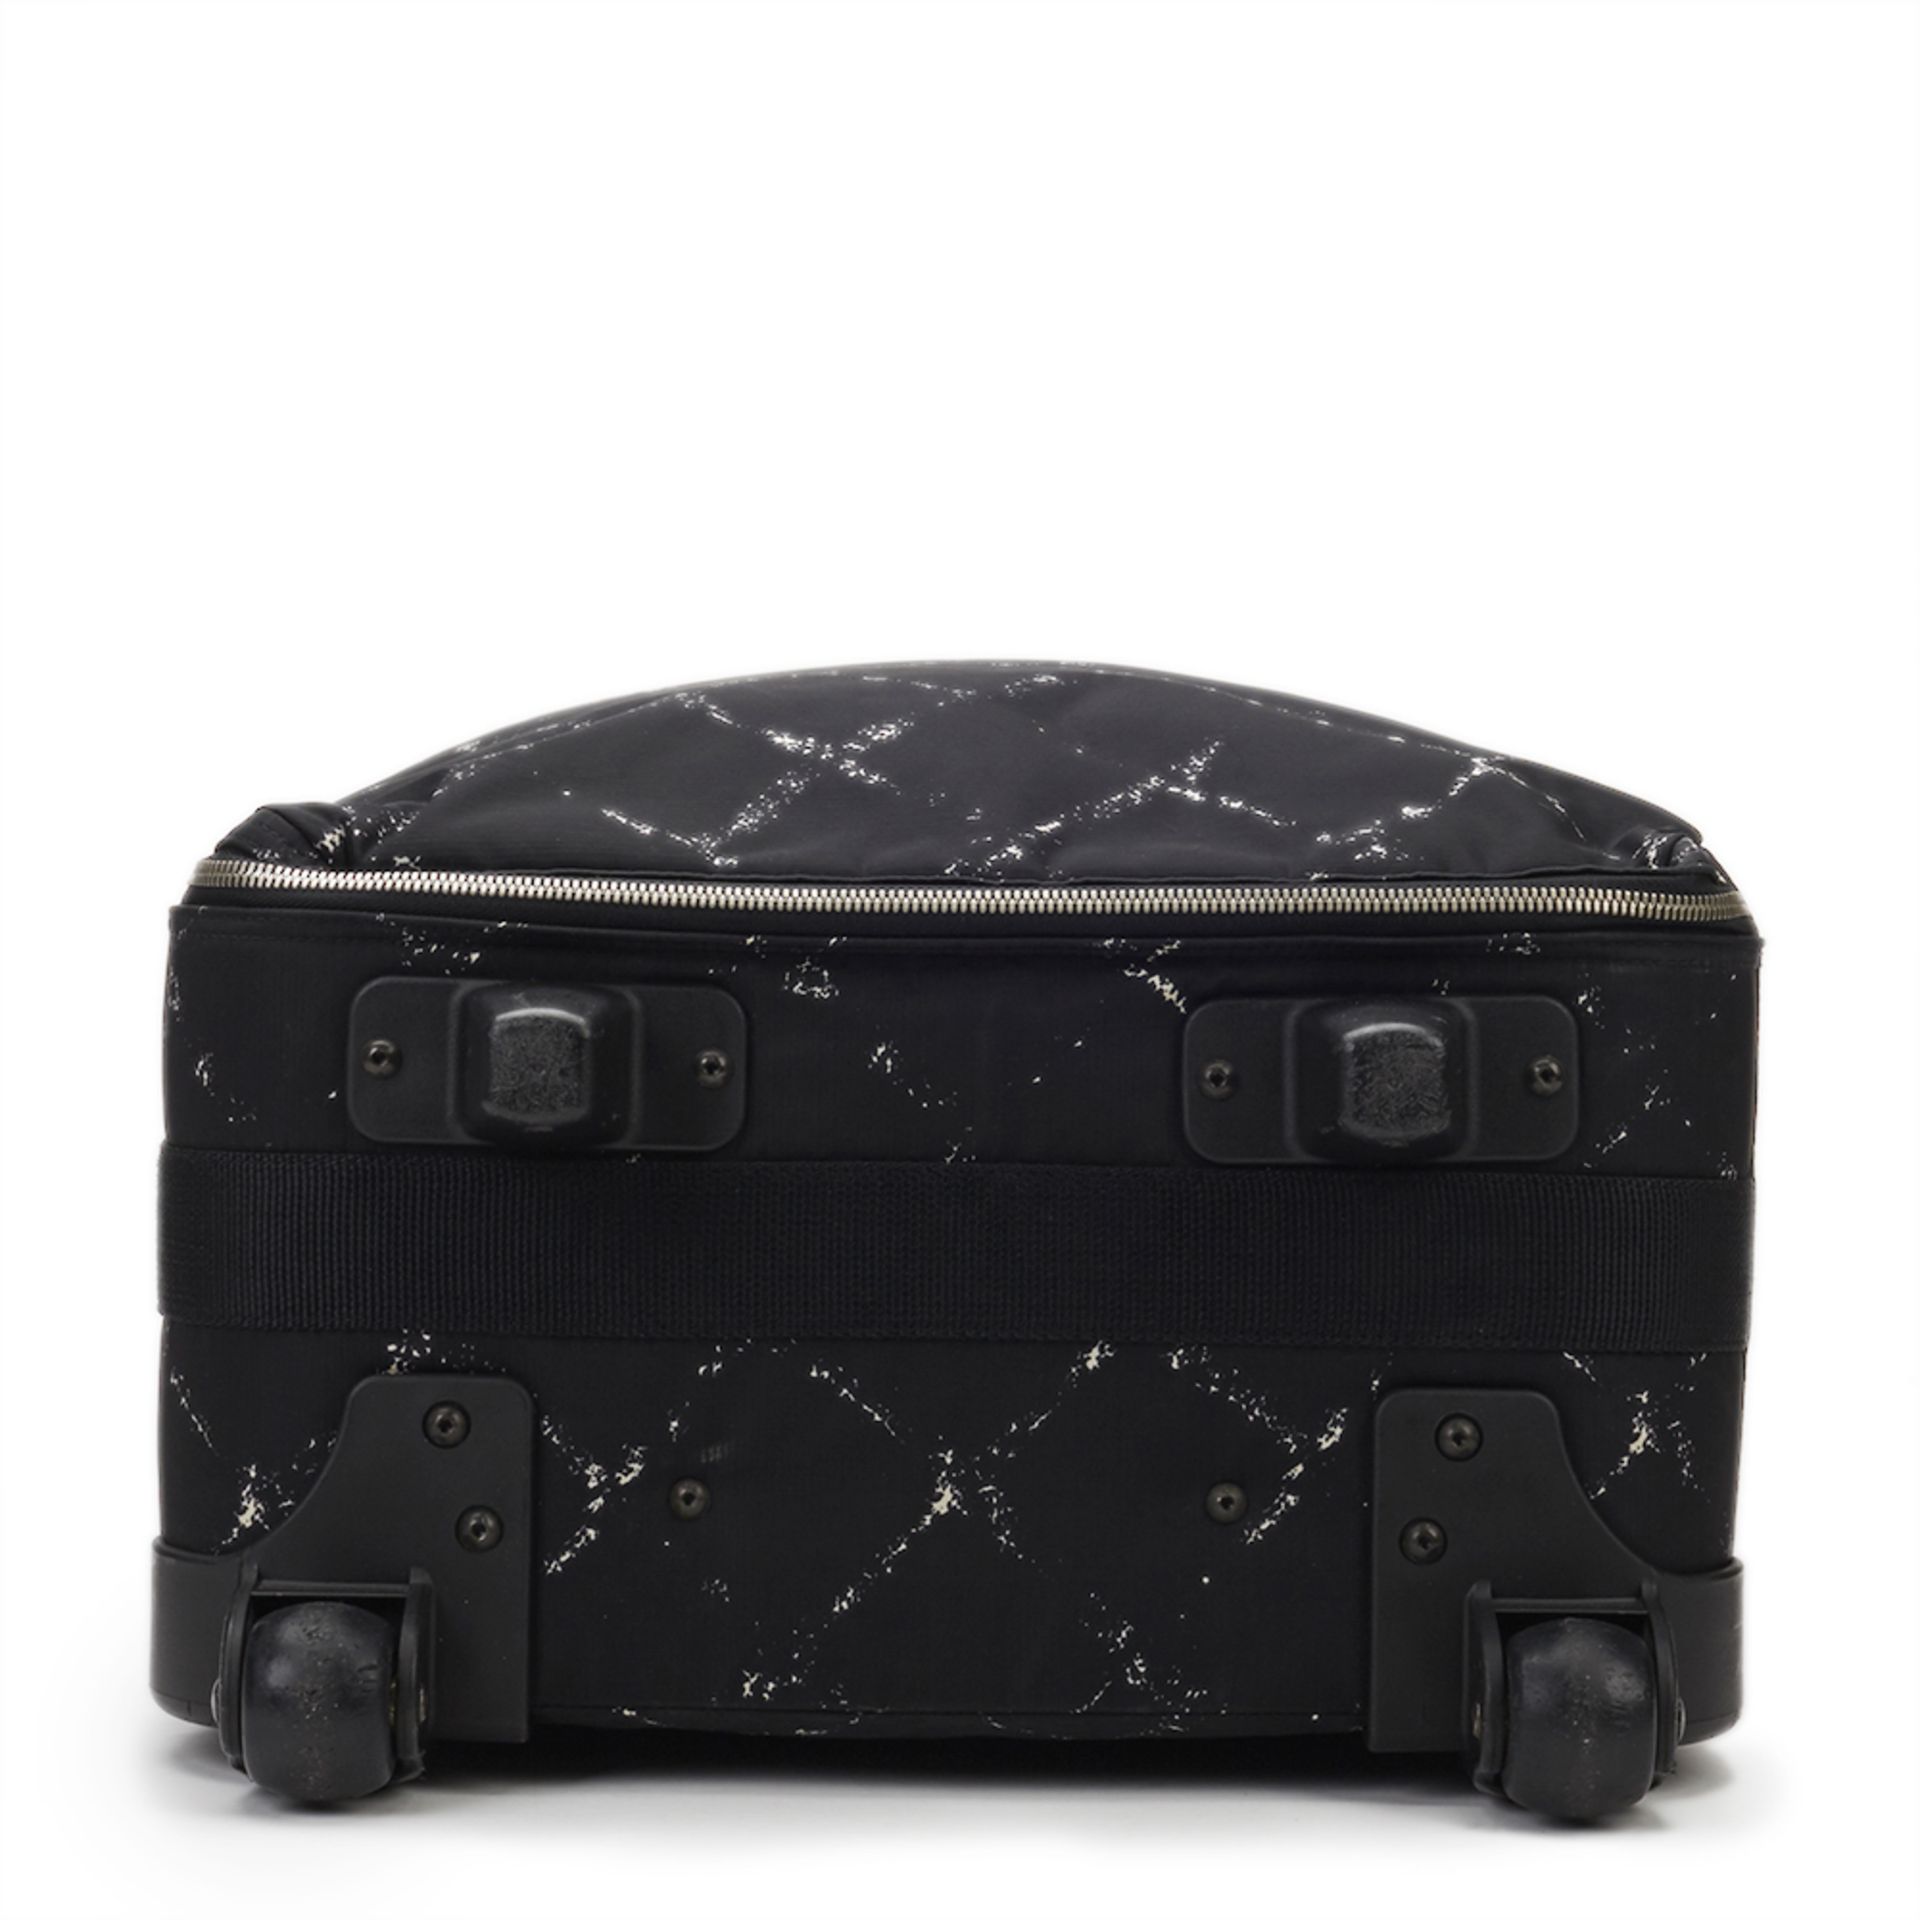 Chanel Rolling Case - Image 5 of 10